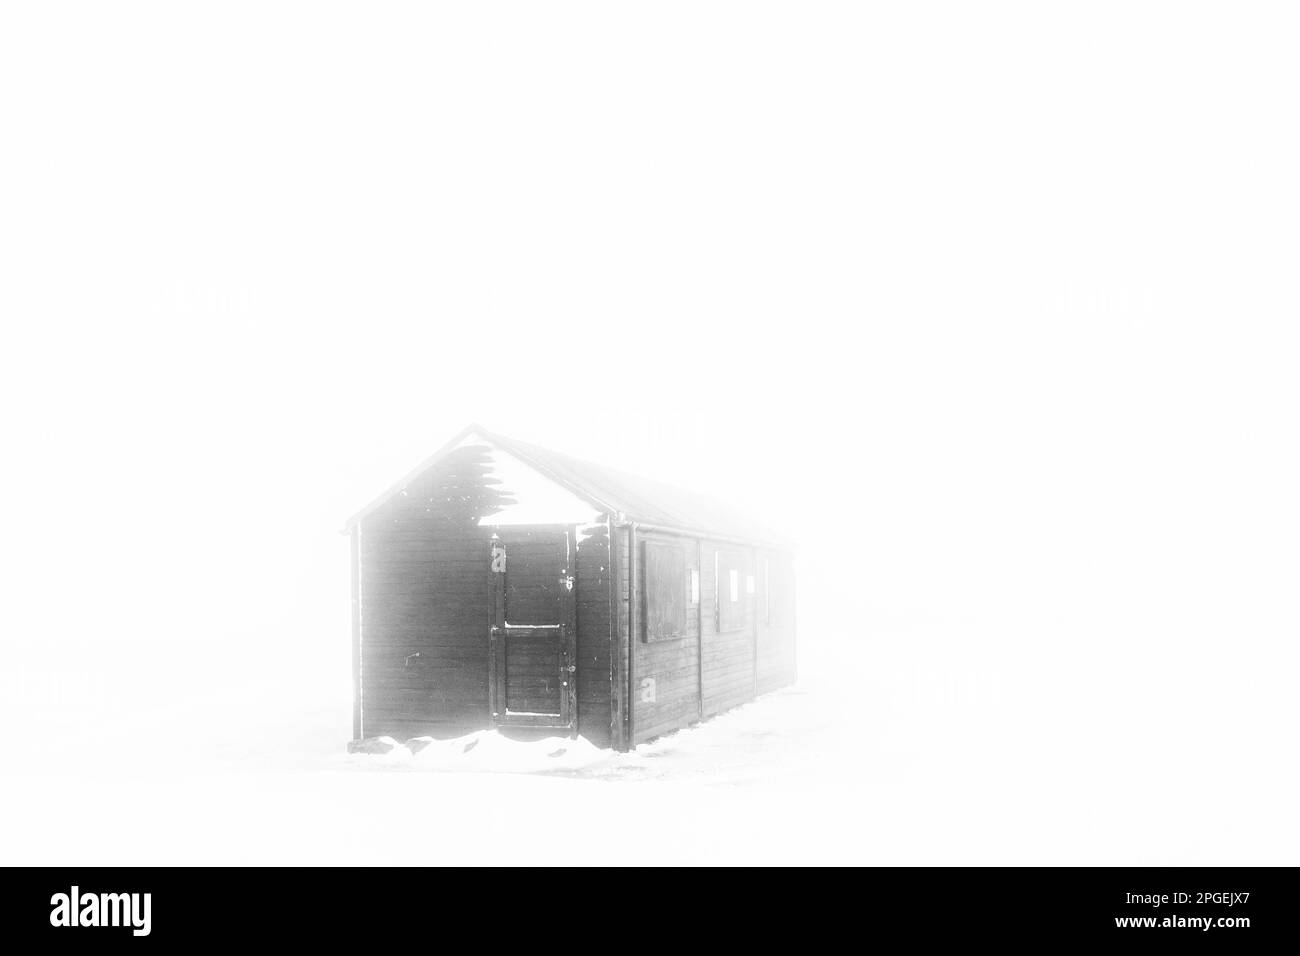 Remote hut locked up on a snowy and foggy day, West Yorkshire, England, UK Stock Photo